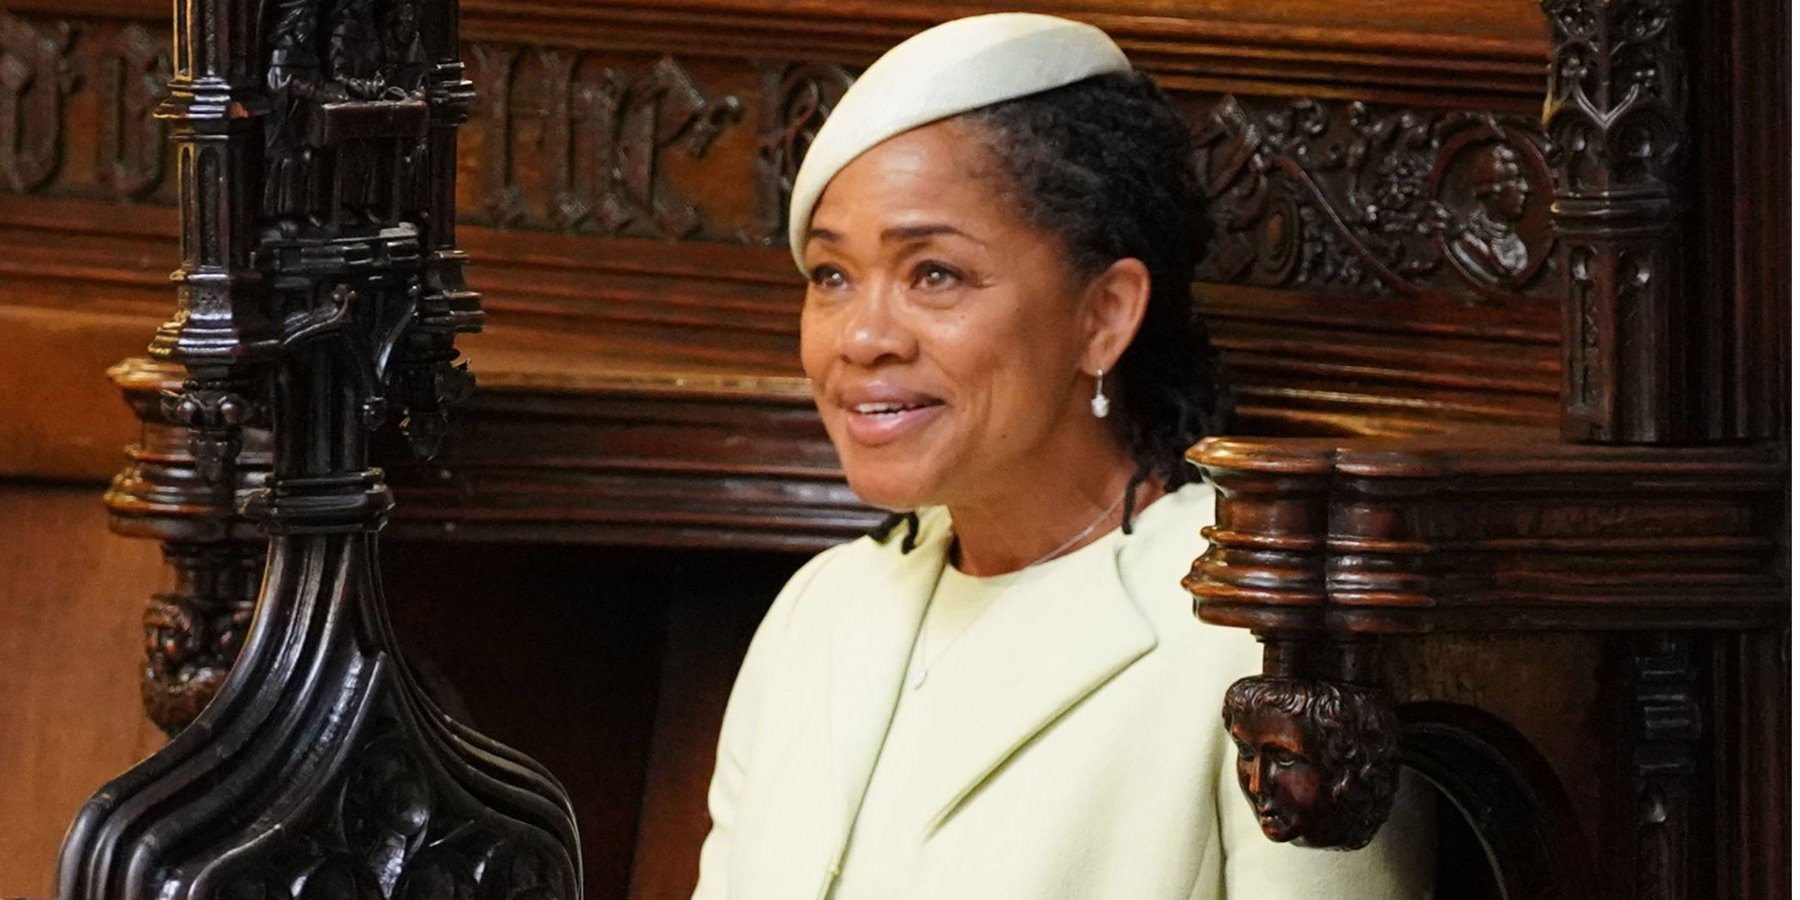 Doria Ragland sits in St. George's Chapel for the wedding of her daughter Meghan Markle to Prince Harry.